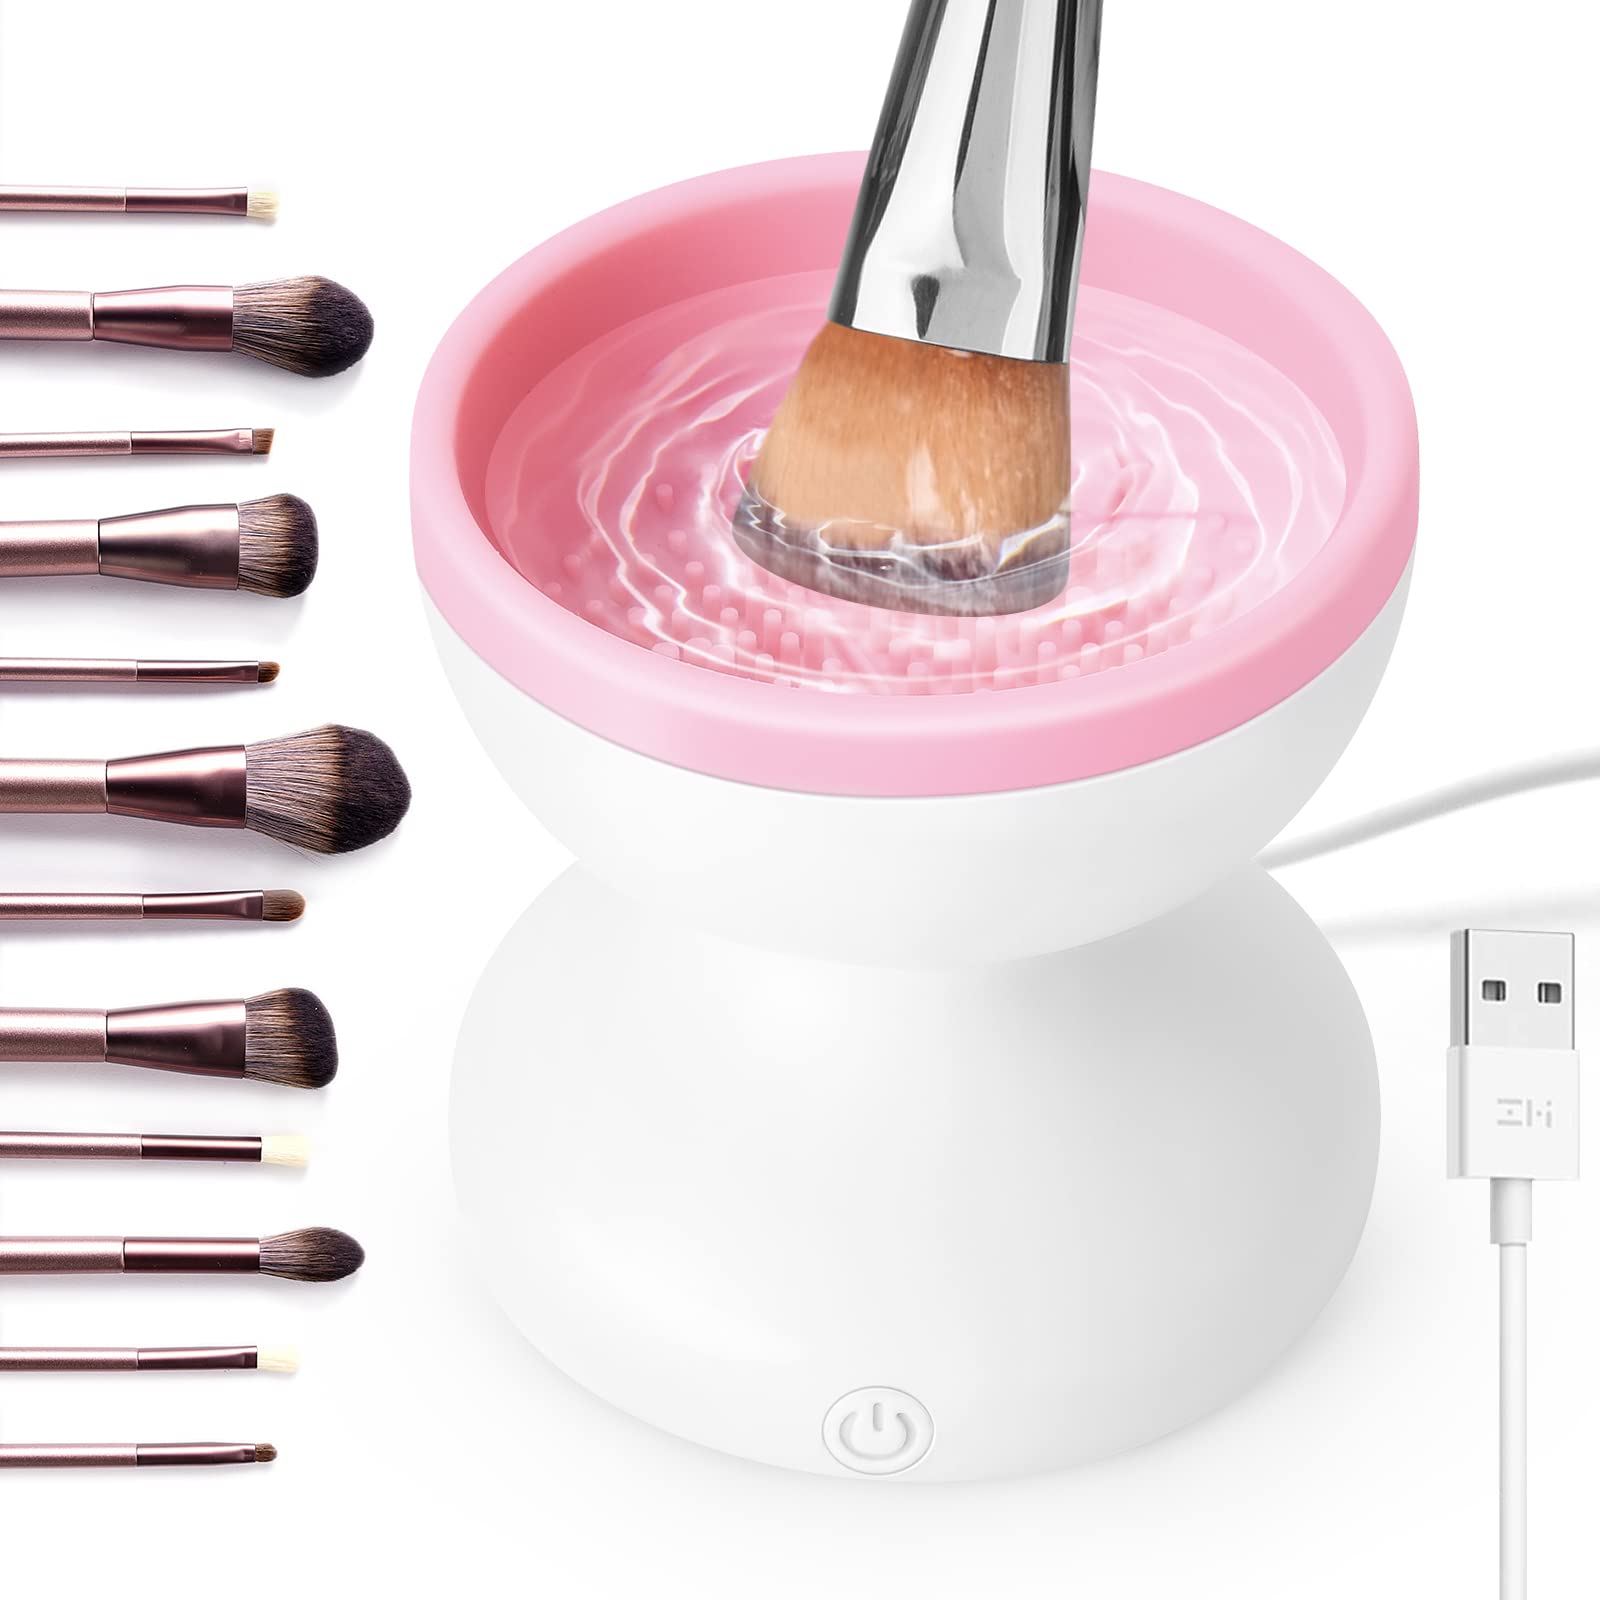 Electric Makeup Brush Cleaner Machine Cosmetic Brush Cleaner Automatic  Spinning Beauty Blender Cleaner Machine Fit Makeup Brush